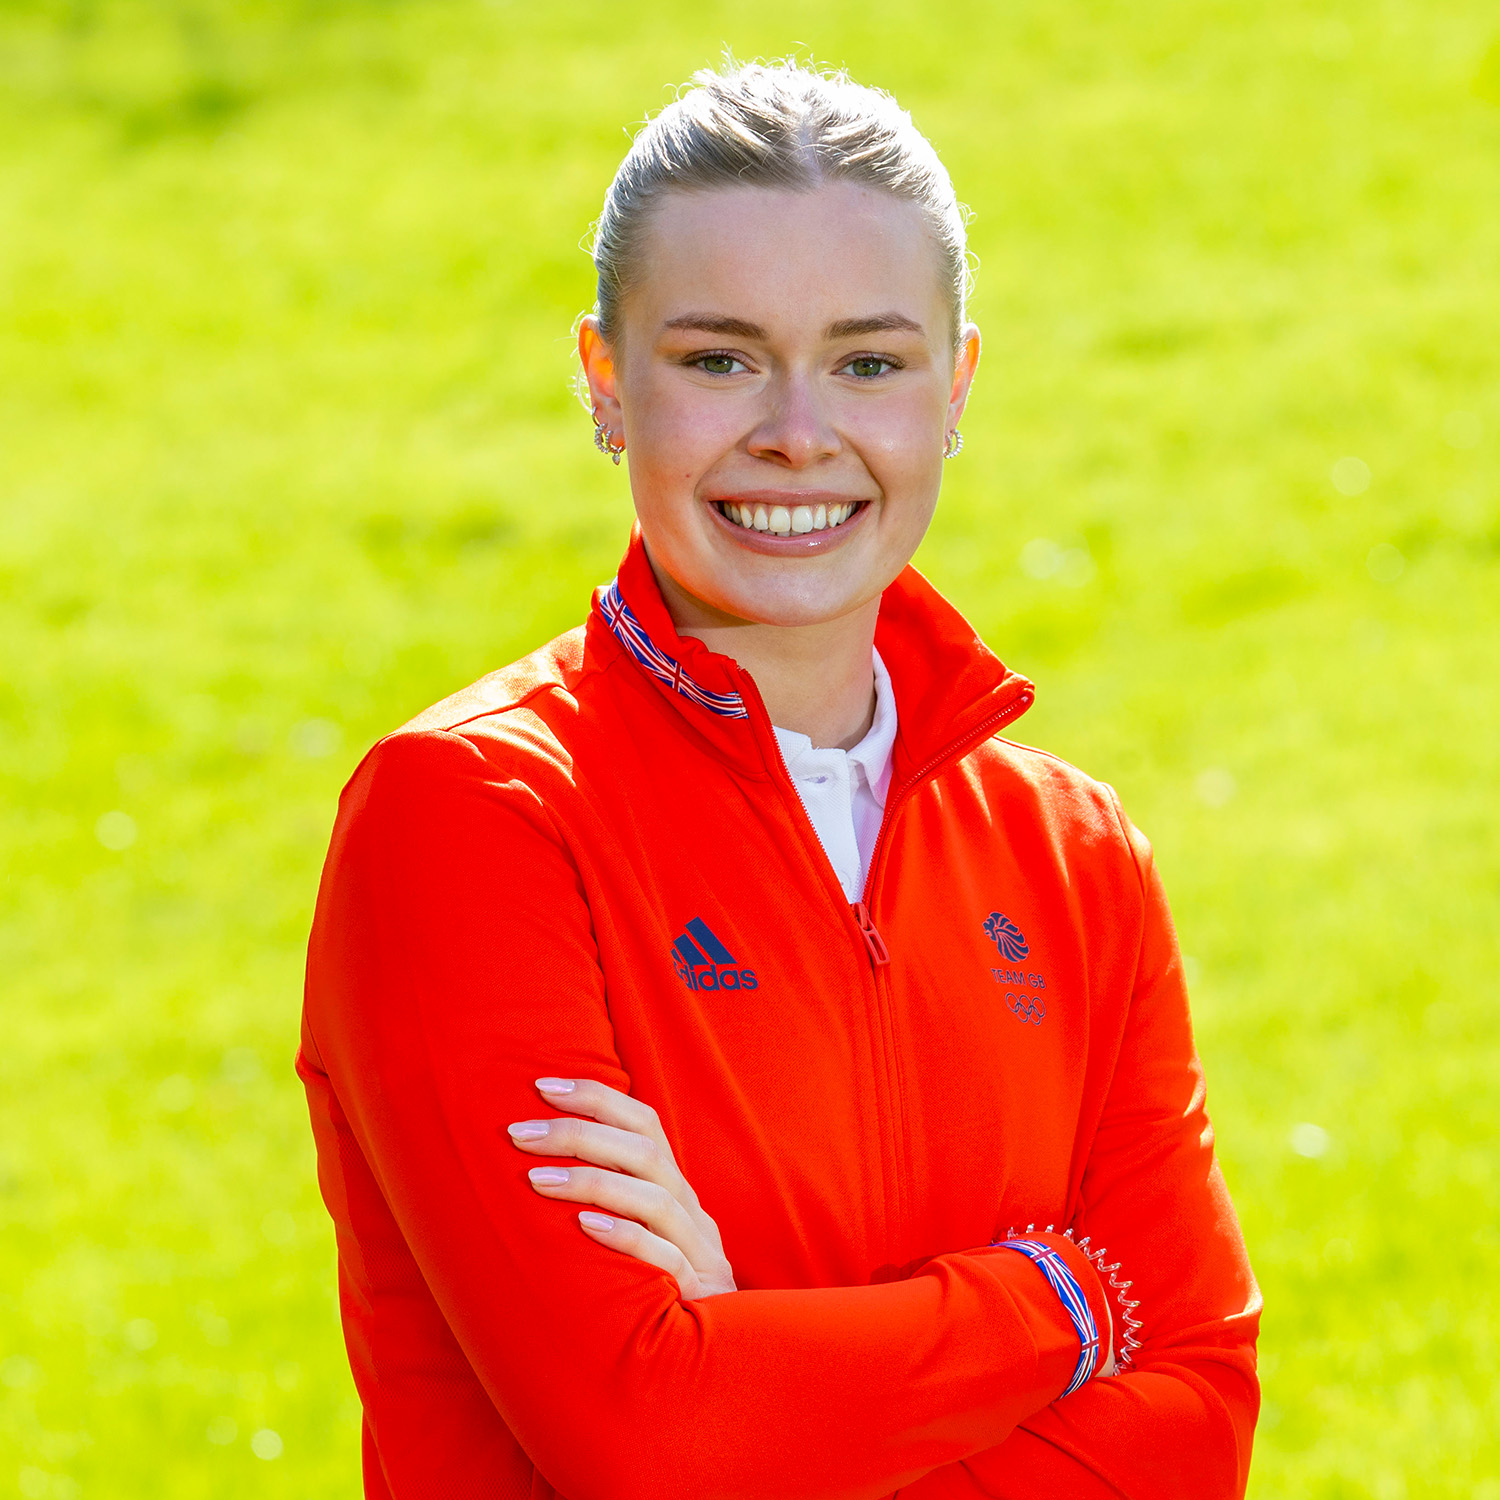 Shanahan won two medals at the Birmingham 2022 Commonwealth Games.